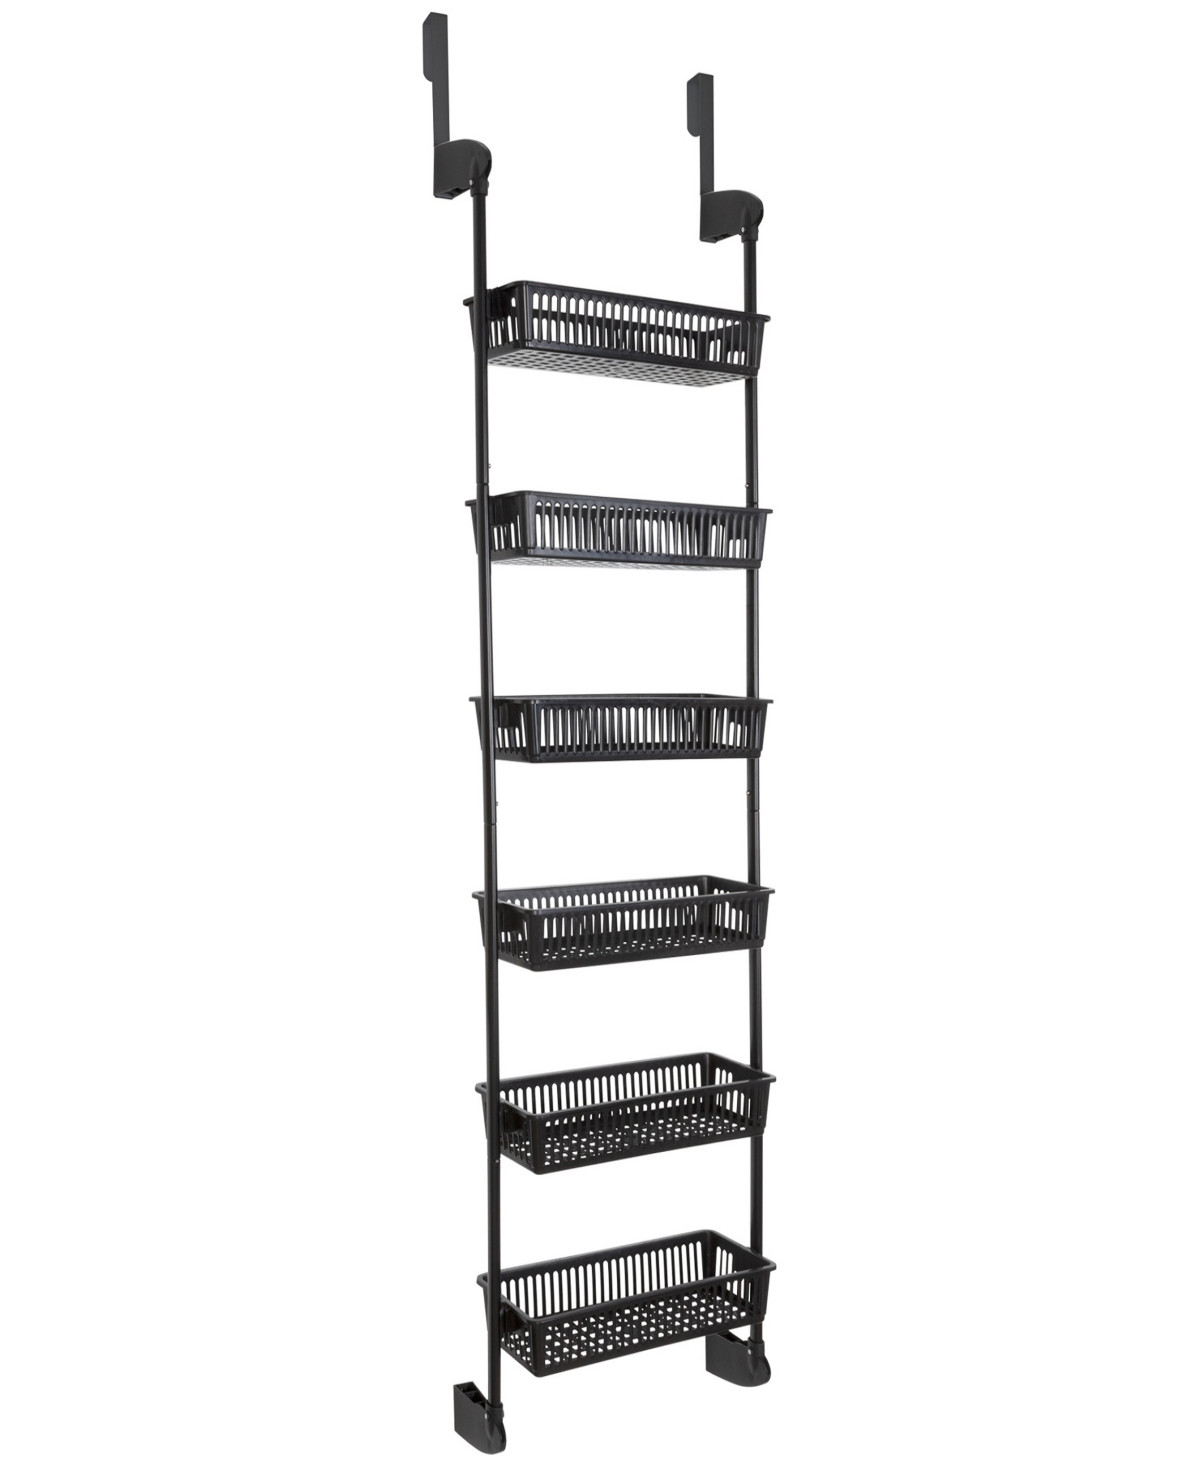 6-Tier Over-the-Door Hanging Pantry Organizer with Full Baskets - All Black